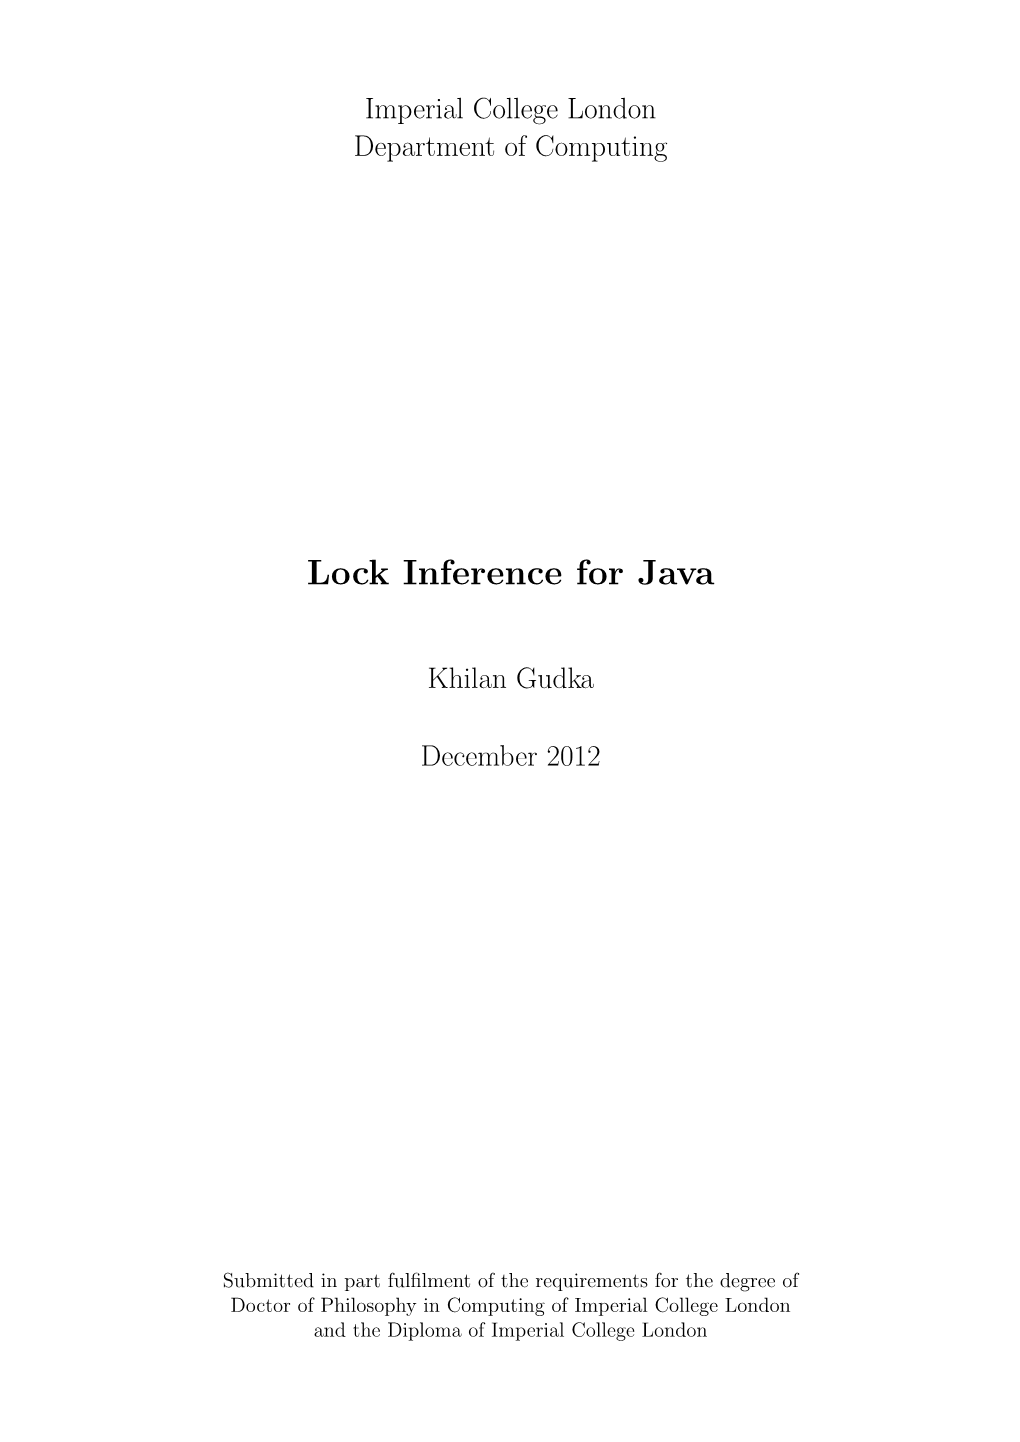 Lock Inference for Java